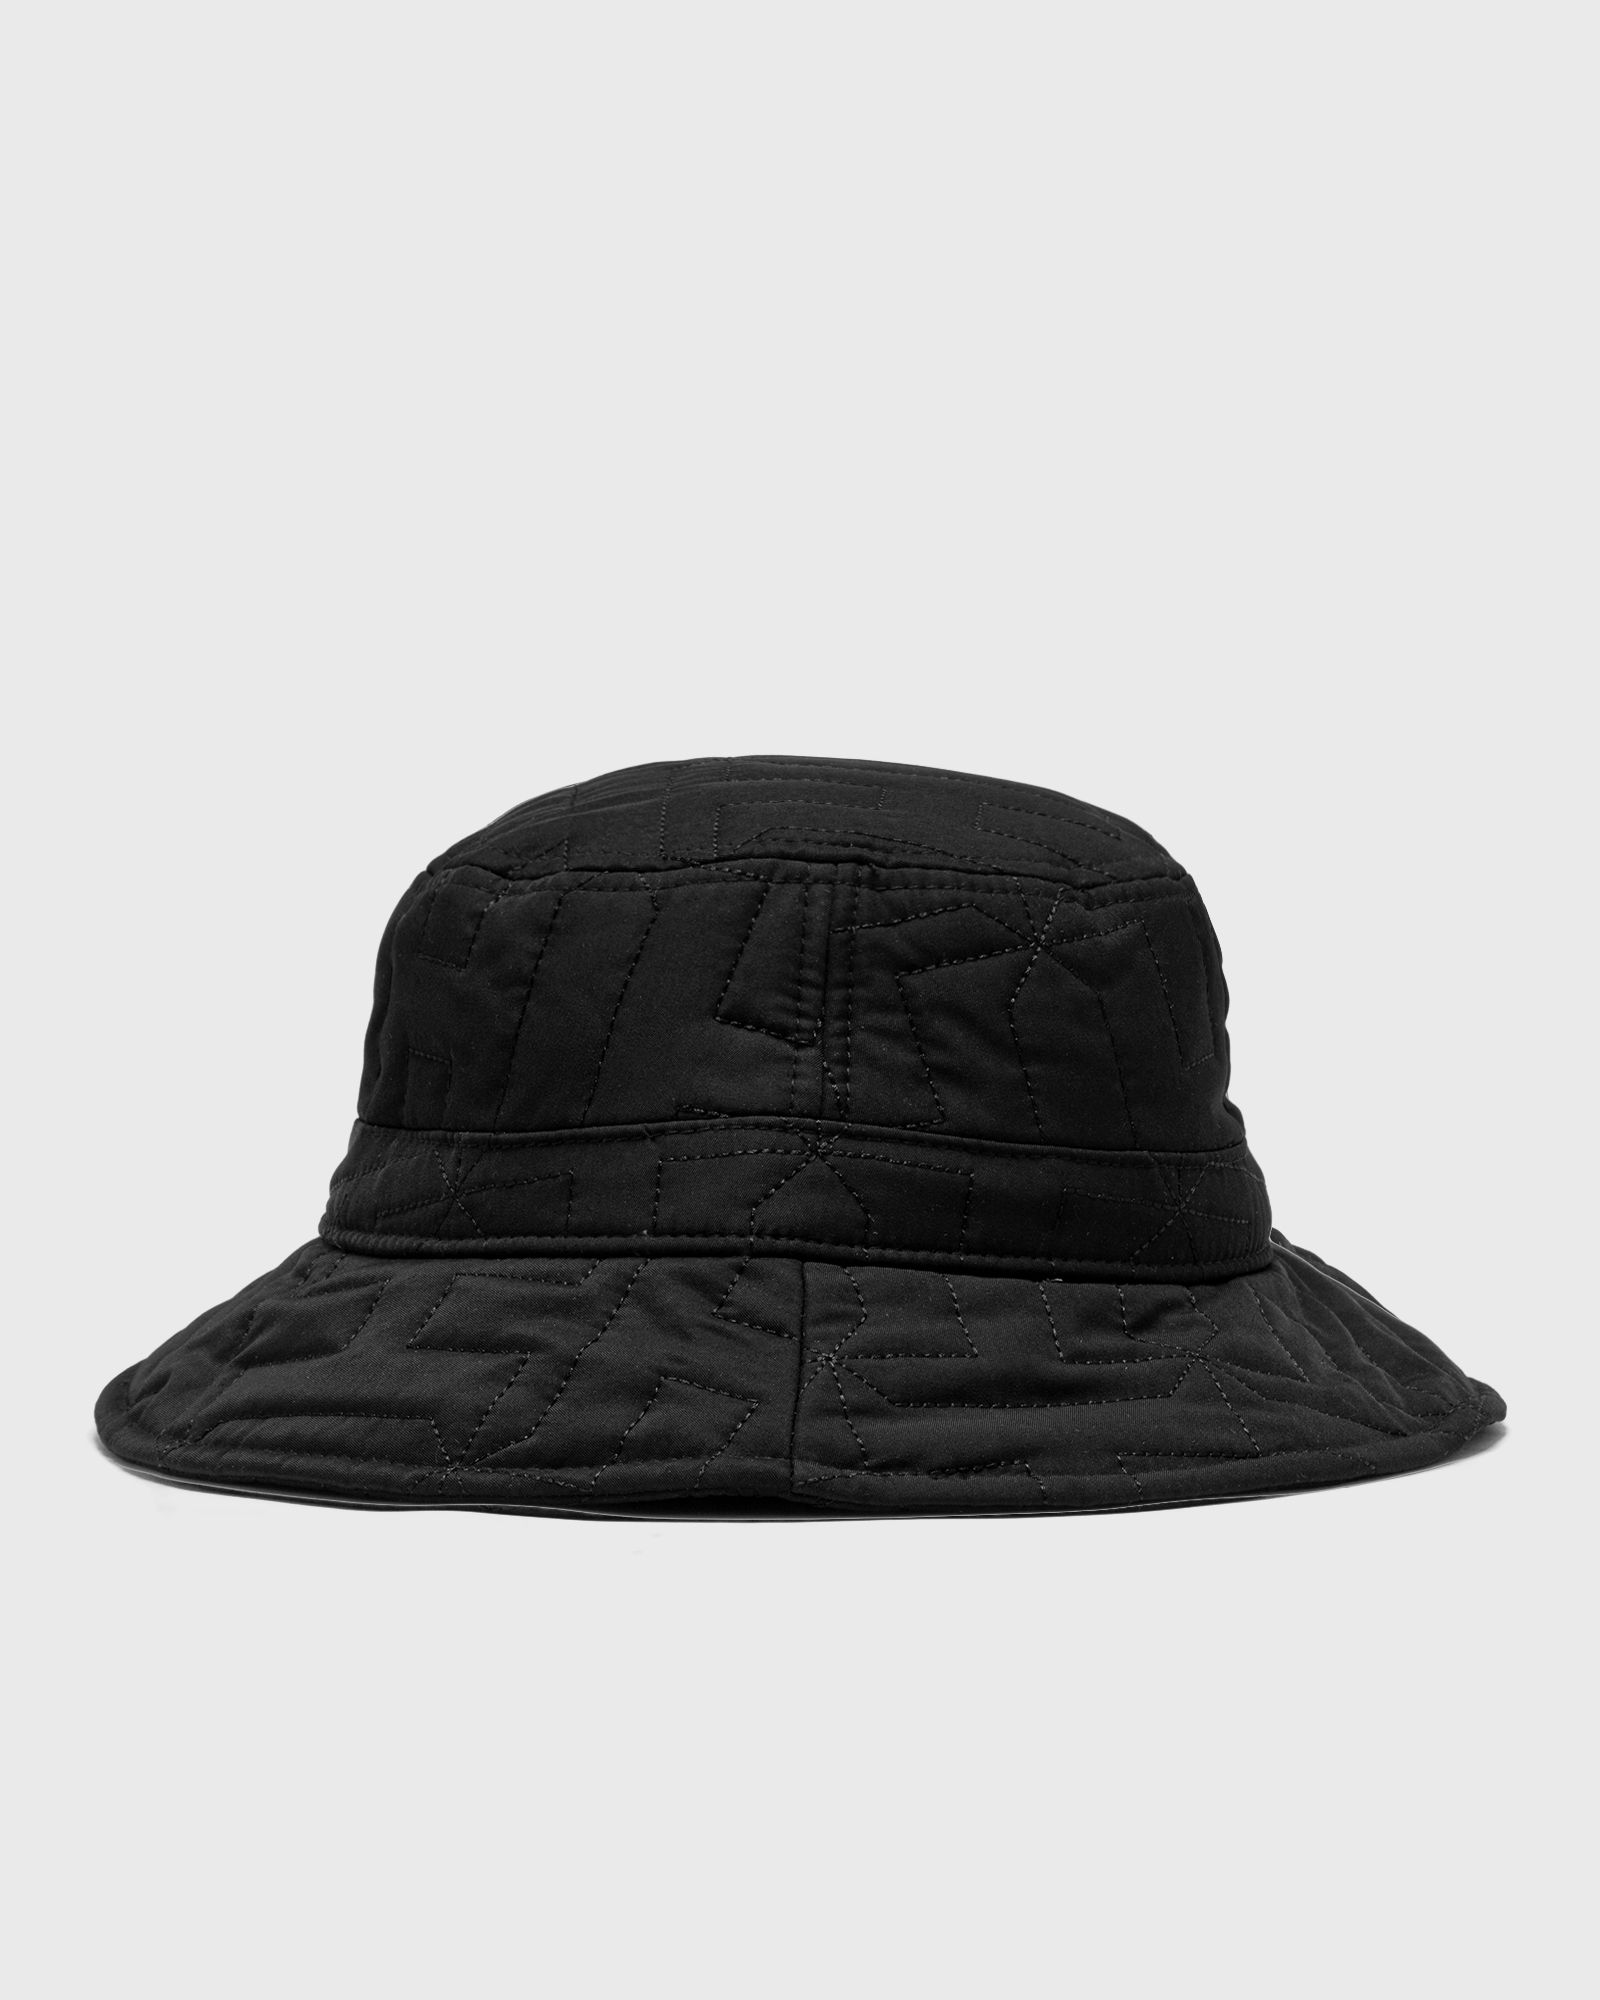 Honor The Gift - h quilted bucket hat men hats black in größe:s/m